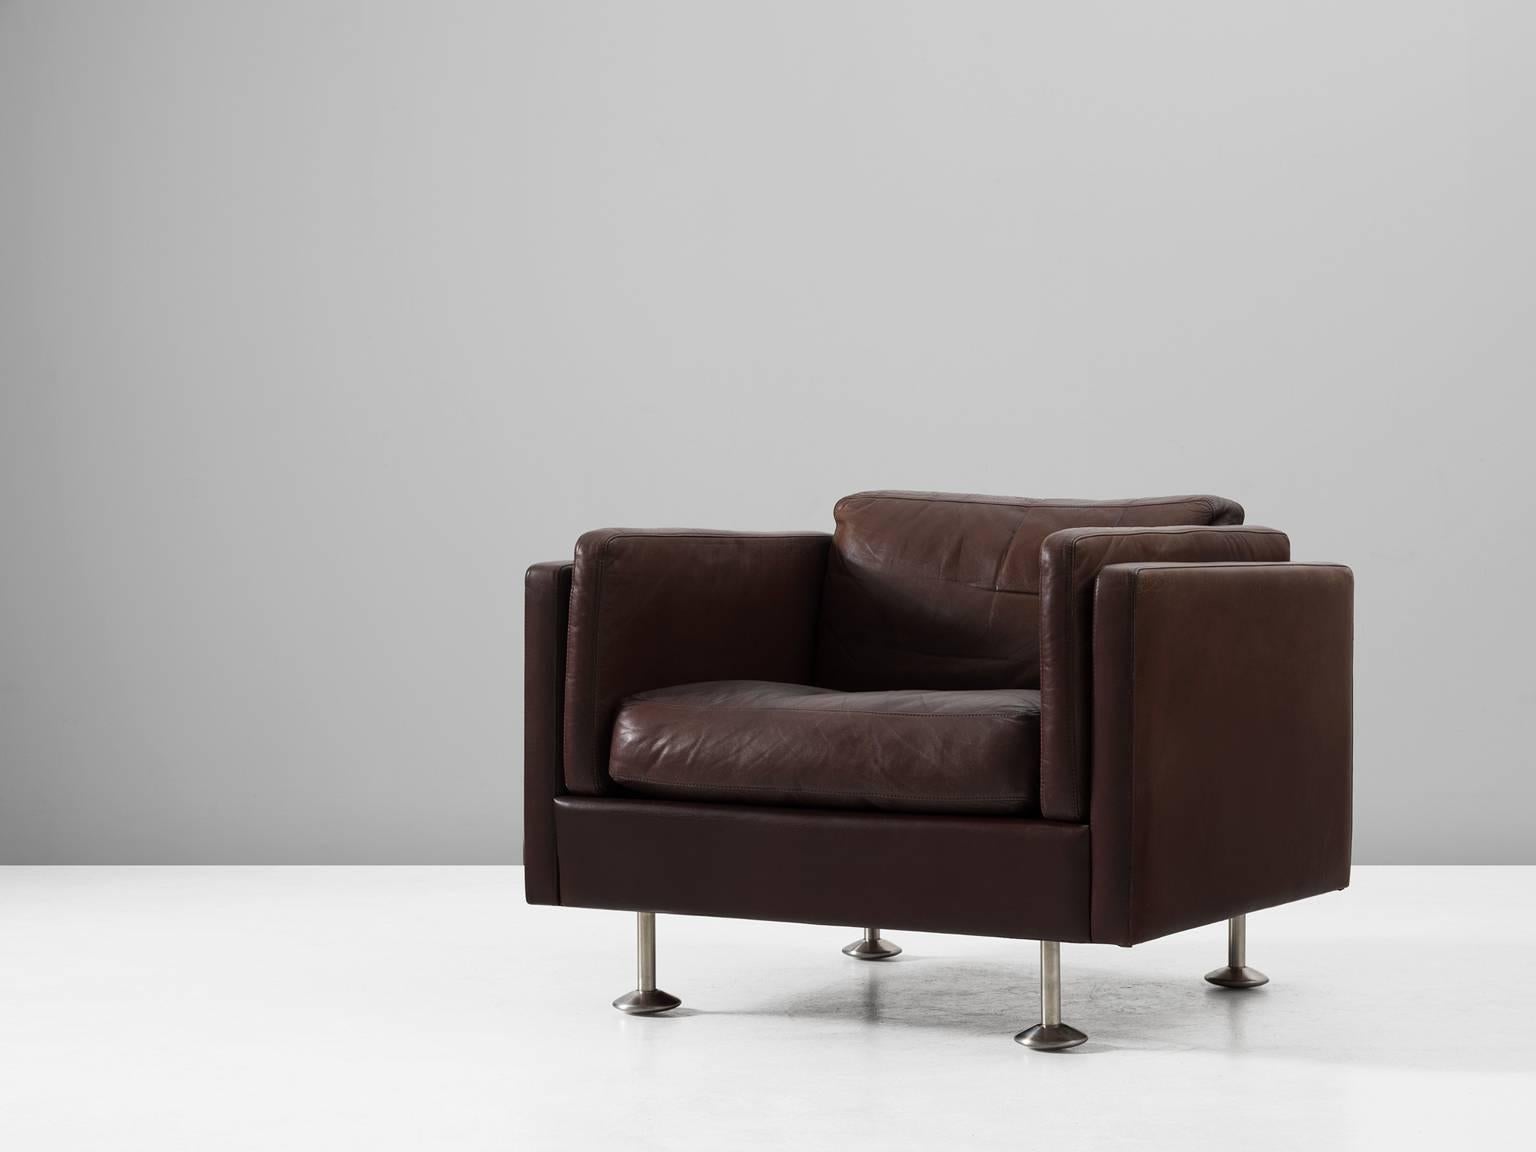 Lounge chairs, in leather and stainless steel, by Illum Wikkelsø, Denmark, 1960s. 

Easy chair in dark brown leather, by Danish designer Illum Wikkelsø. This club chair has a cubic design. The tight and clean outside is complemented with a soft and